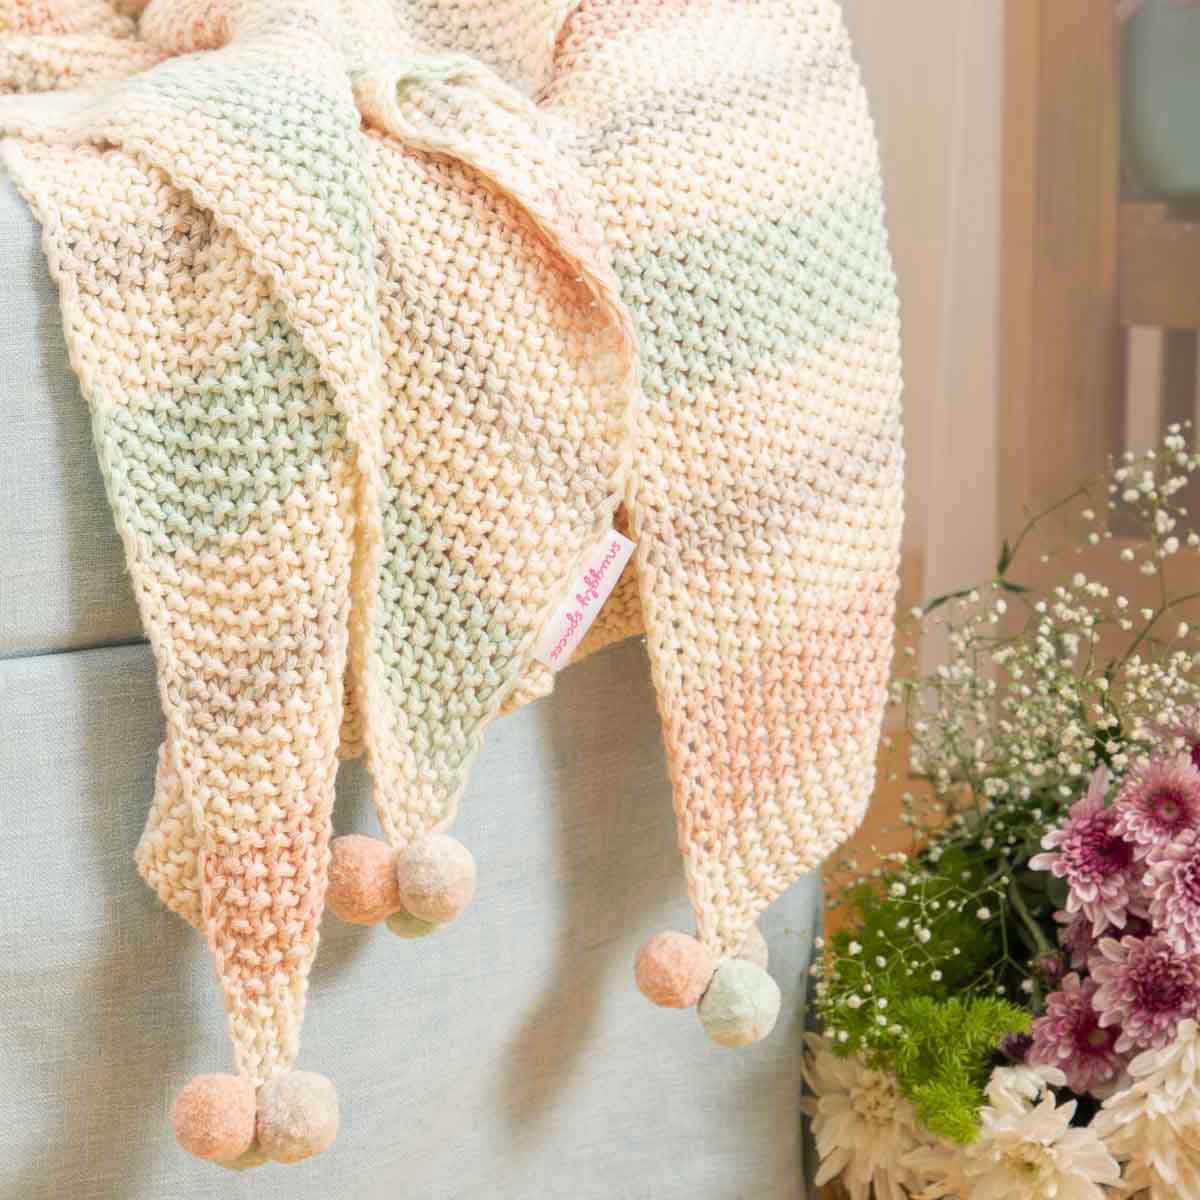 Snuggly Knitted Blanket - Pastel Stripes